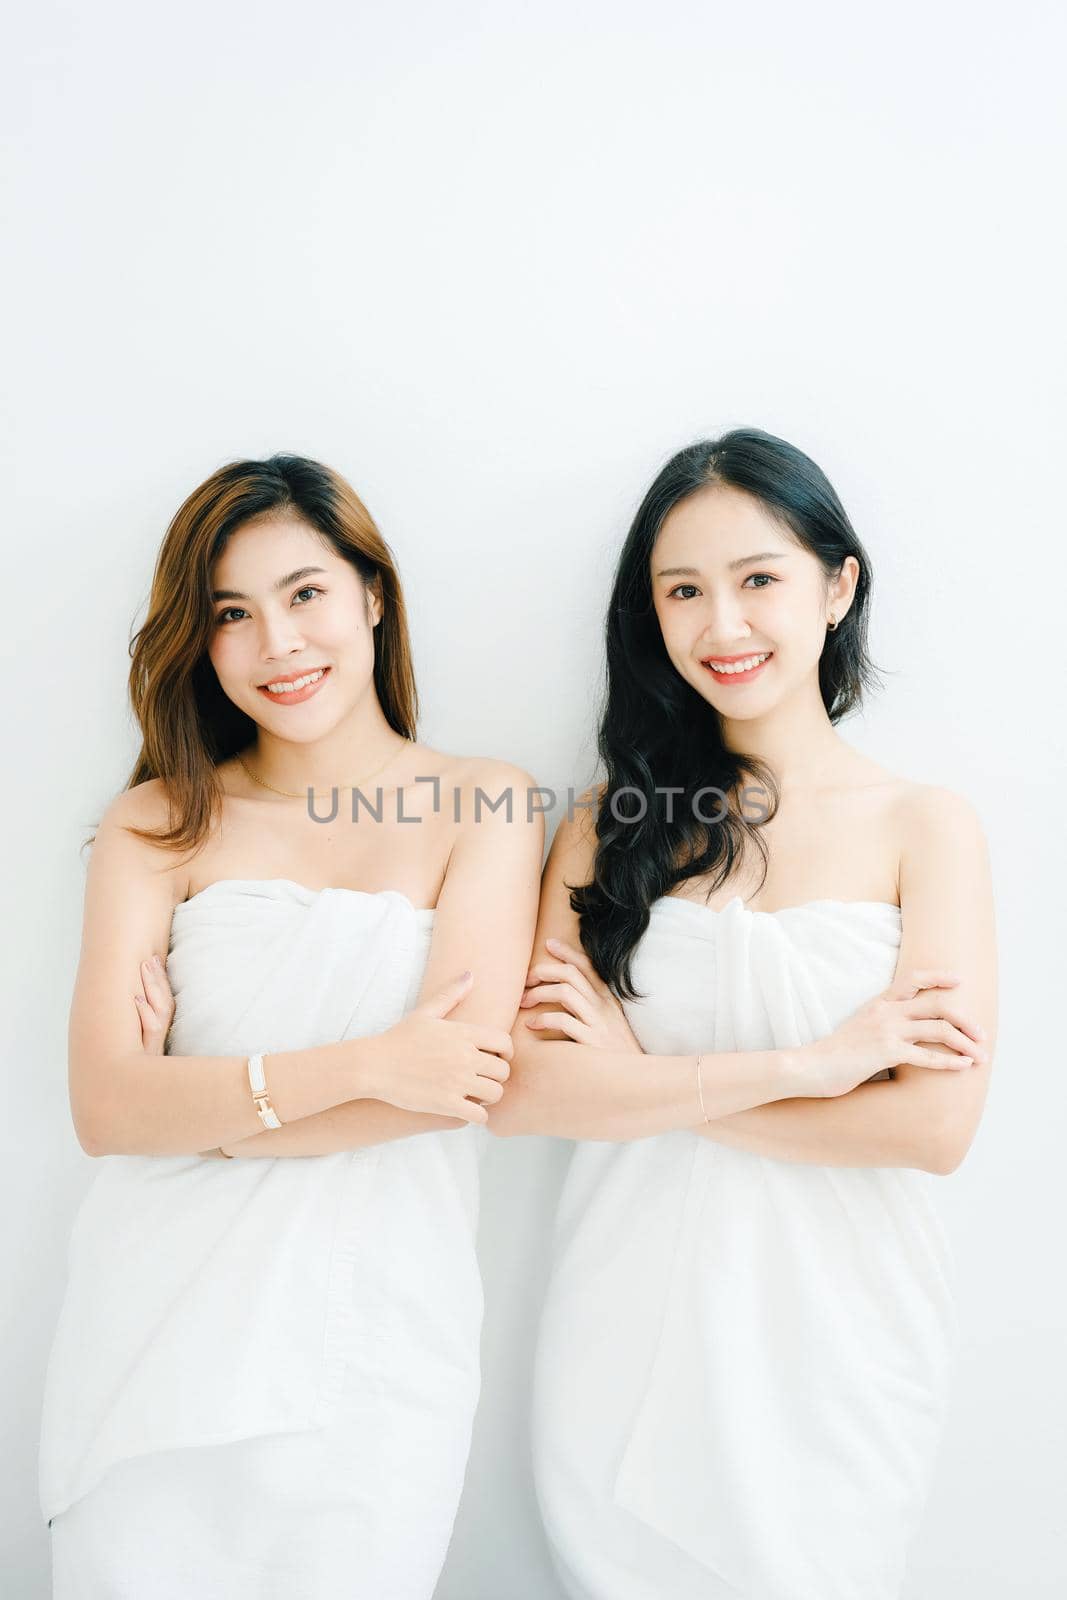 lgbtq, LGBT concept, homosexuality, portrait of two Asian women posing happy together and showing love for each other while taking a shower by Manastrong